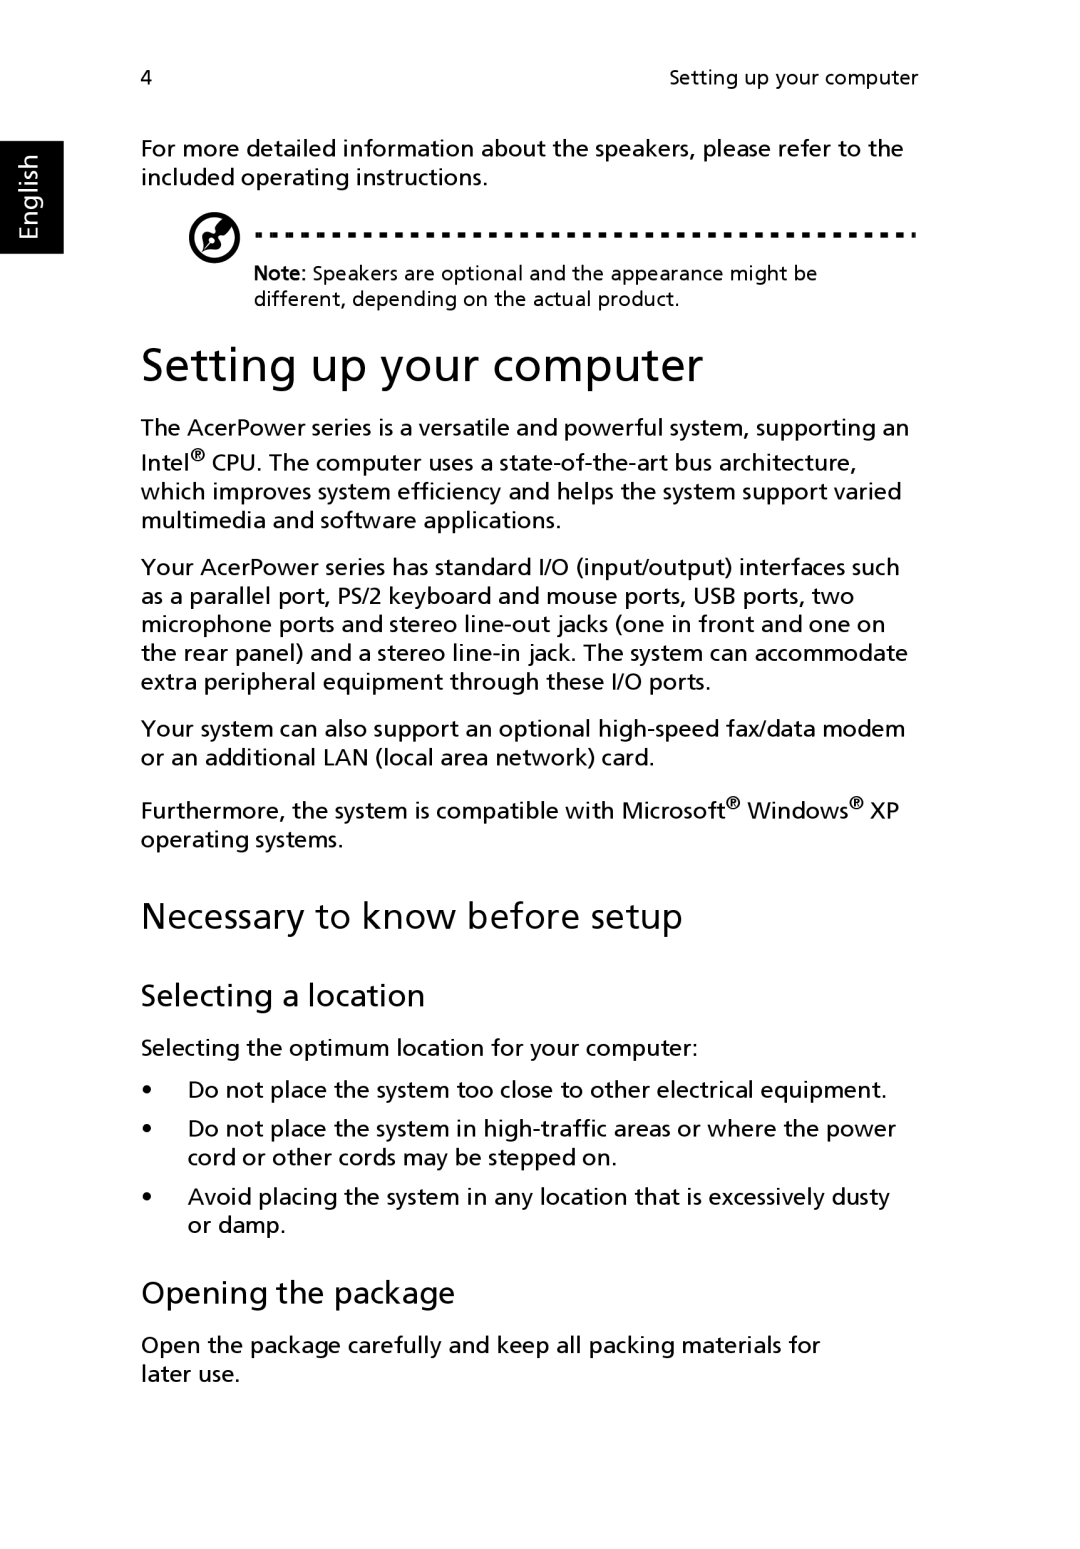 Acer POWER SERIES Setting up your computer, Necessary to know before setup, Selecting a location, Opening the package 